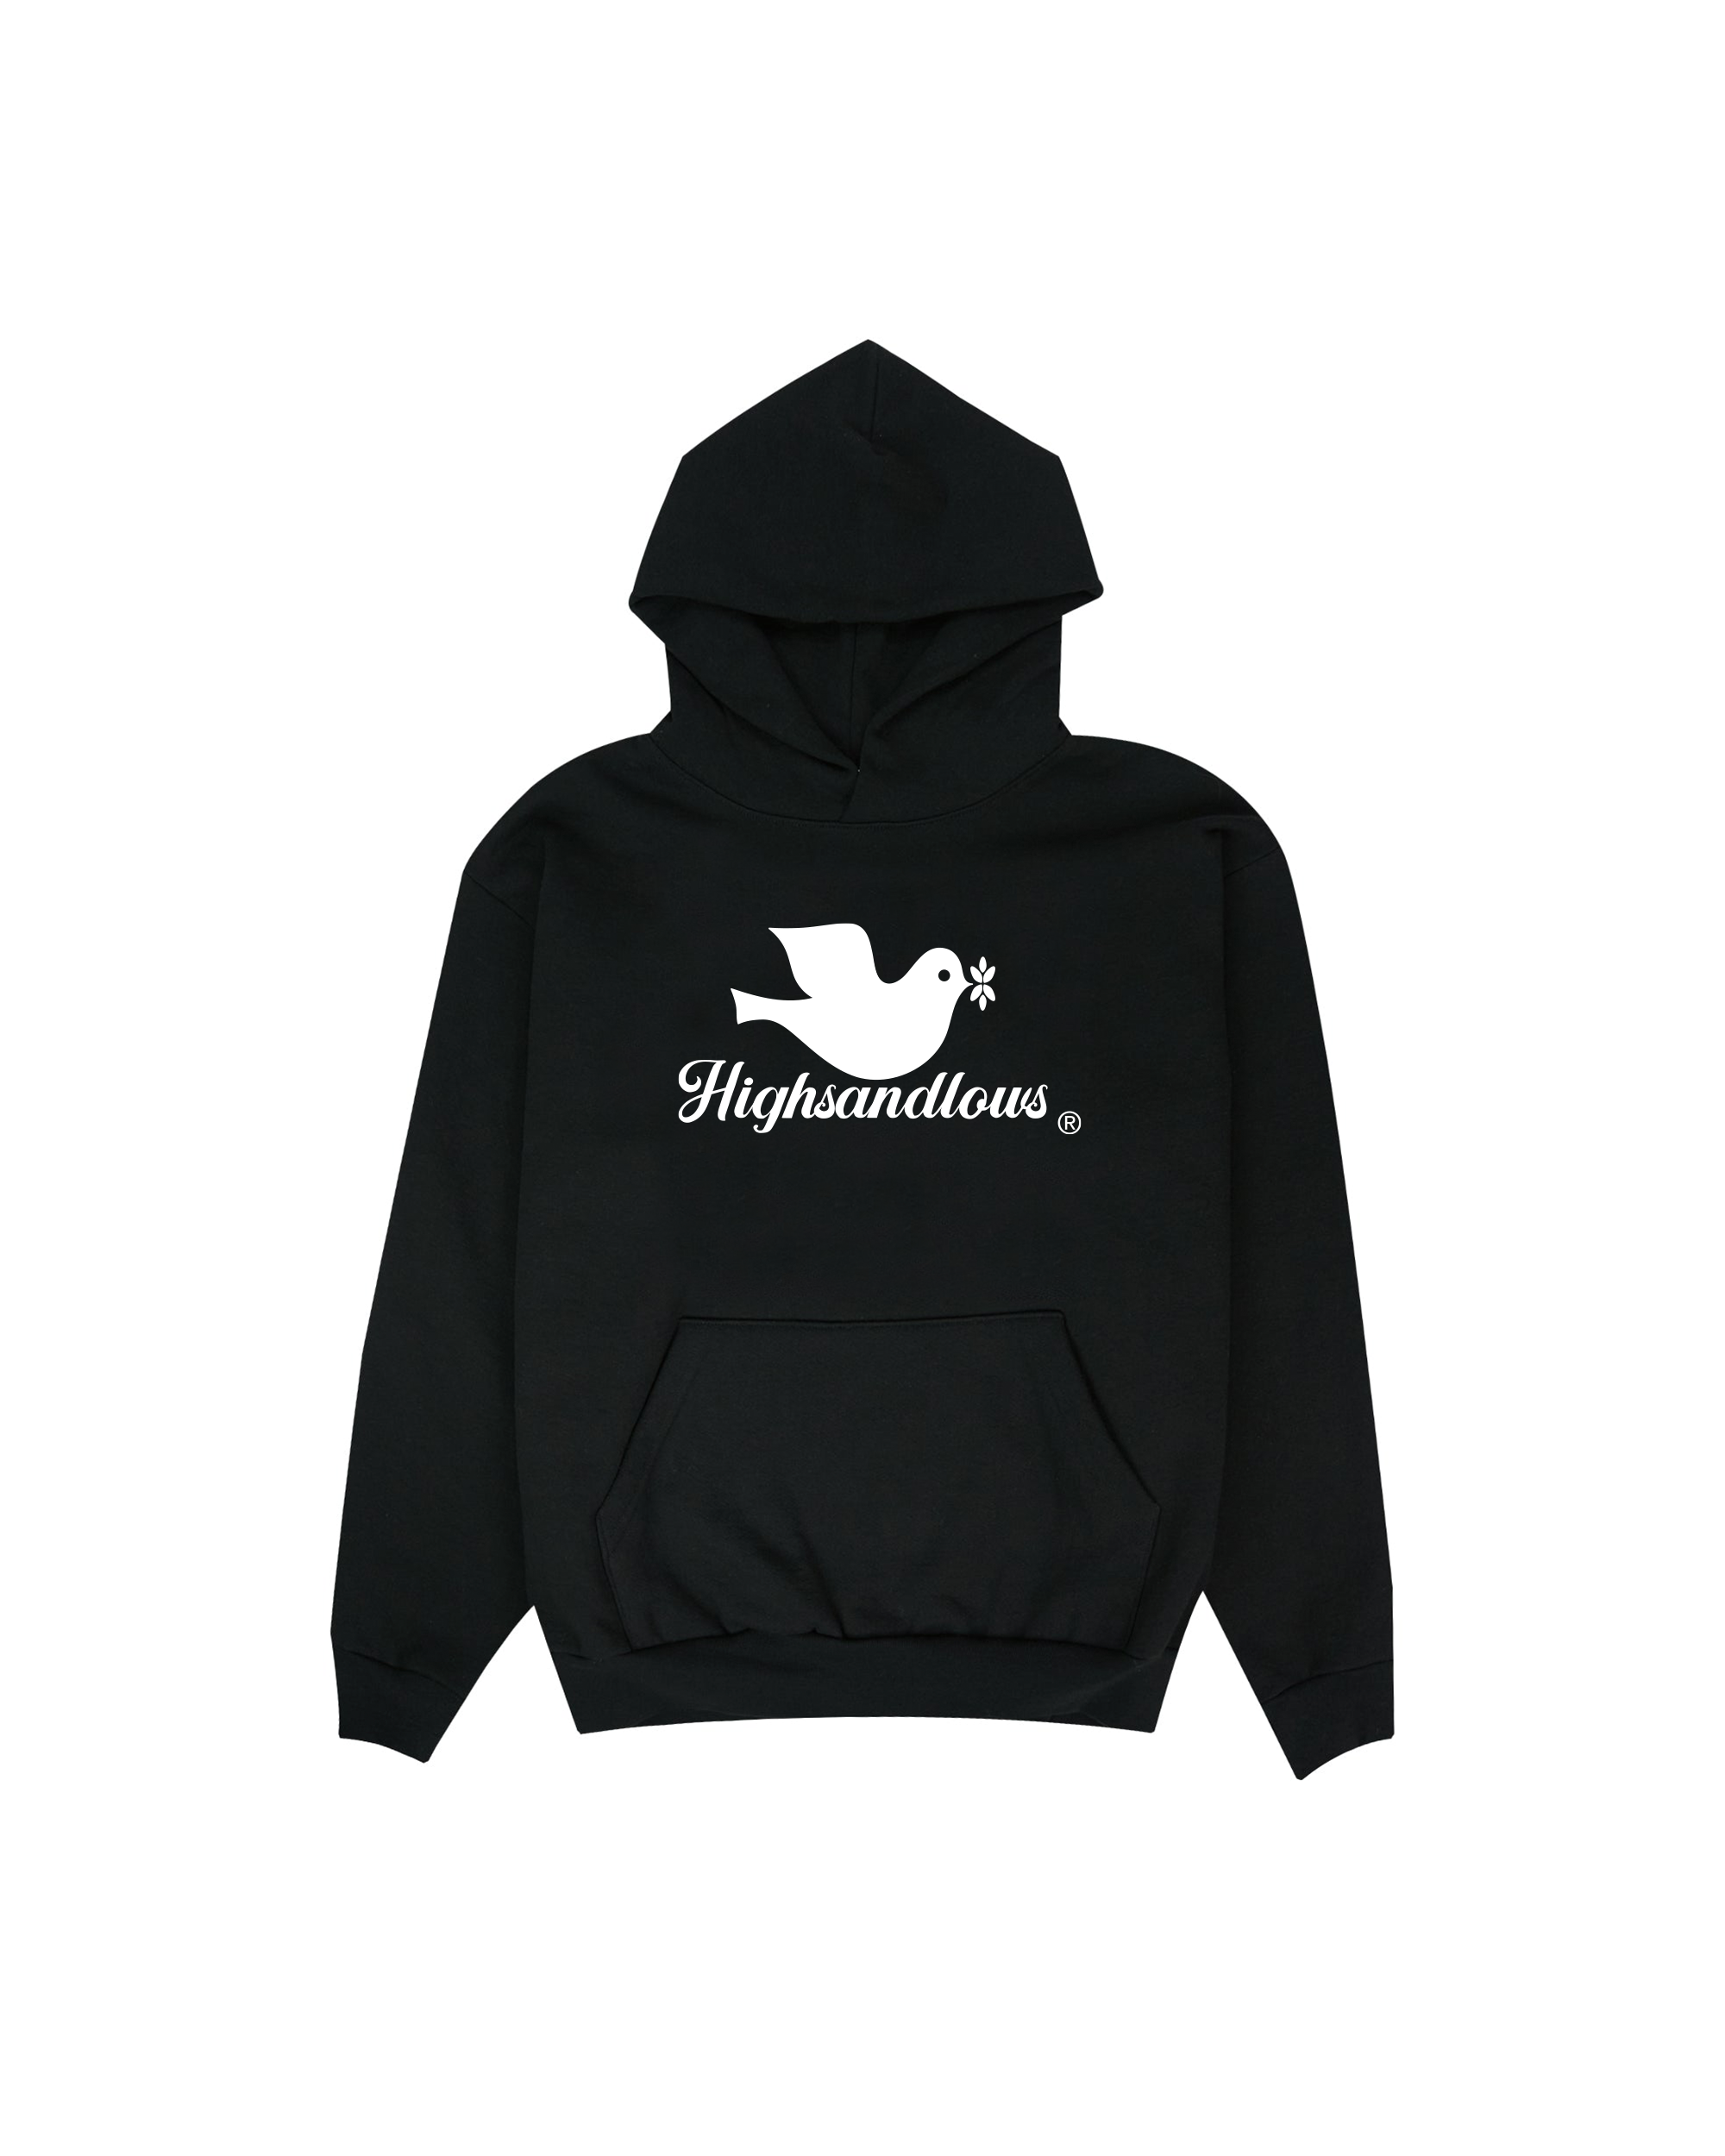 Flying High Hooded Sweatshirt - Black – HIGHS AND LOWS